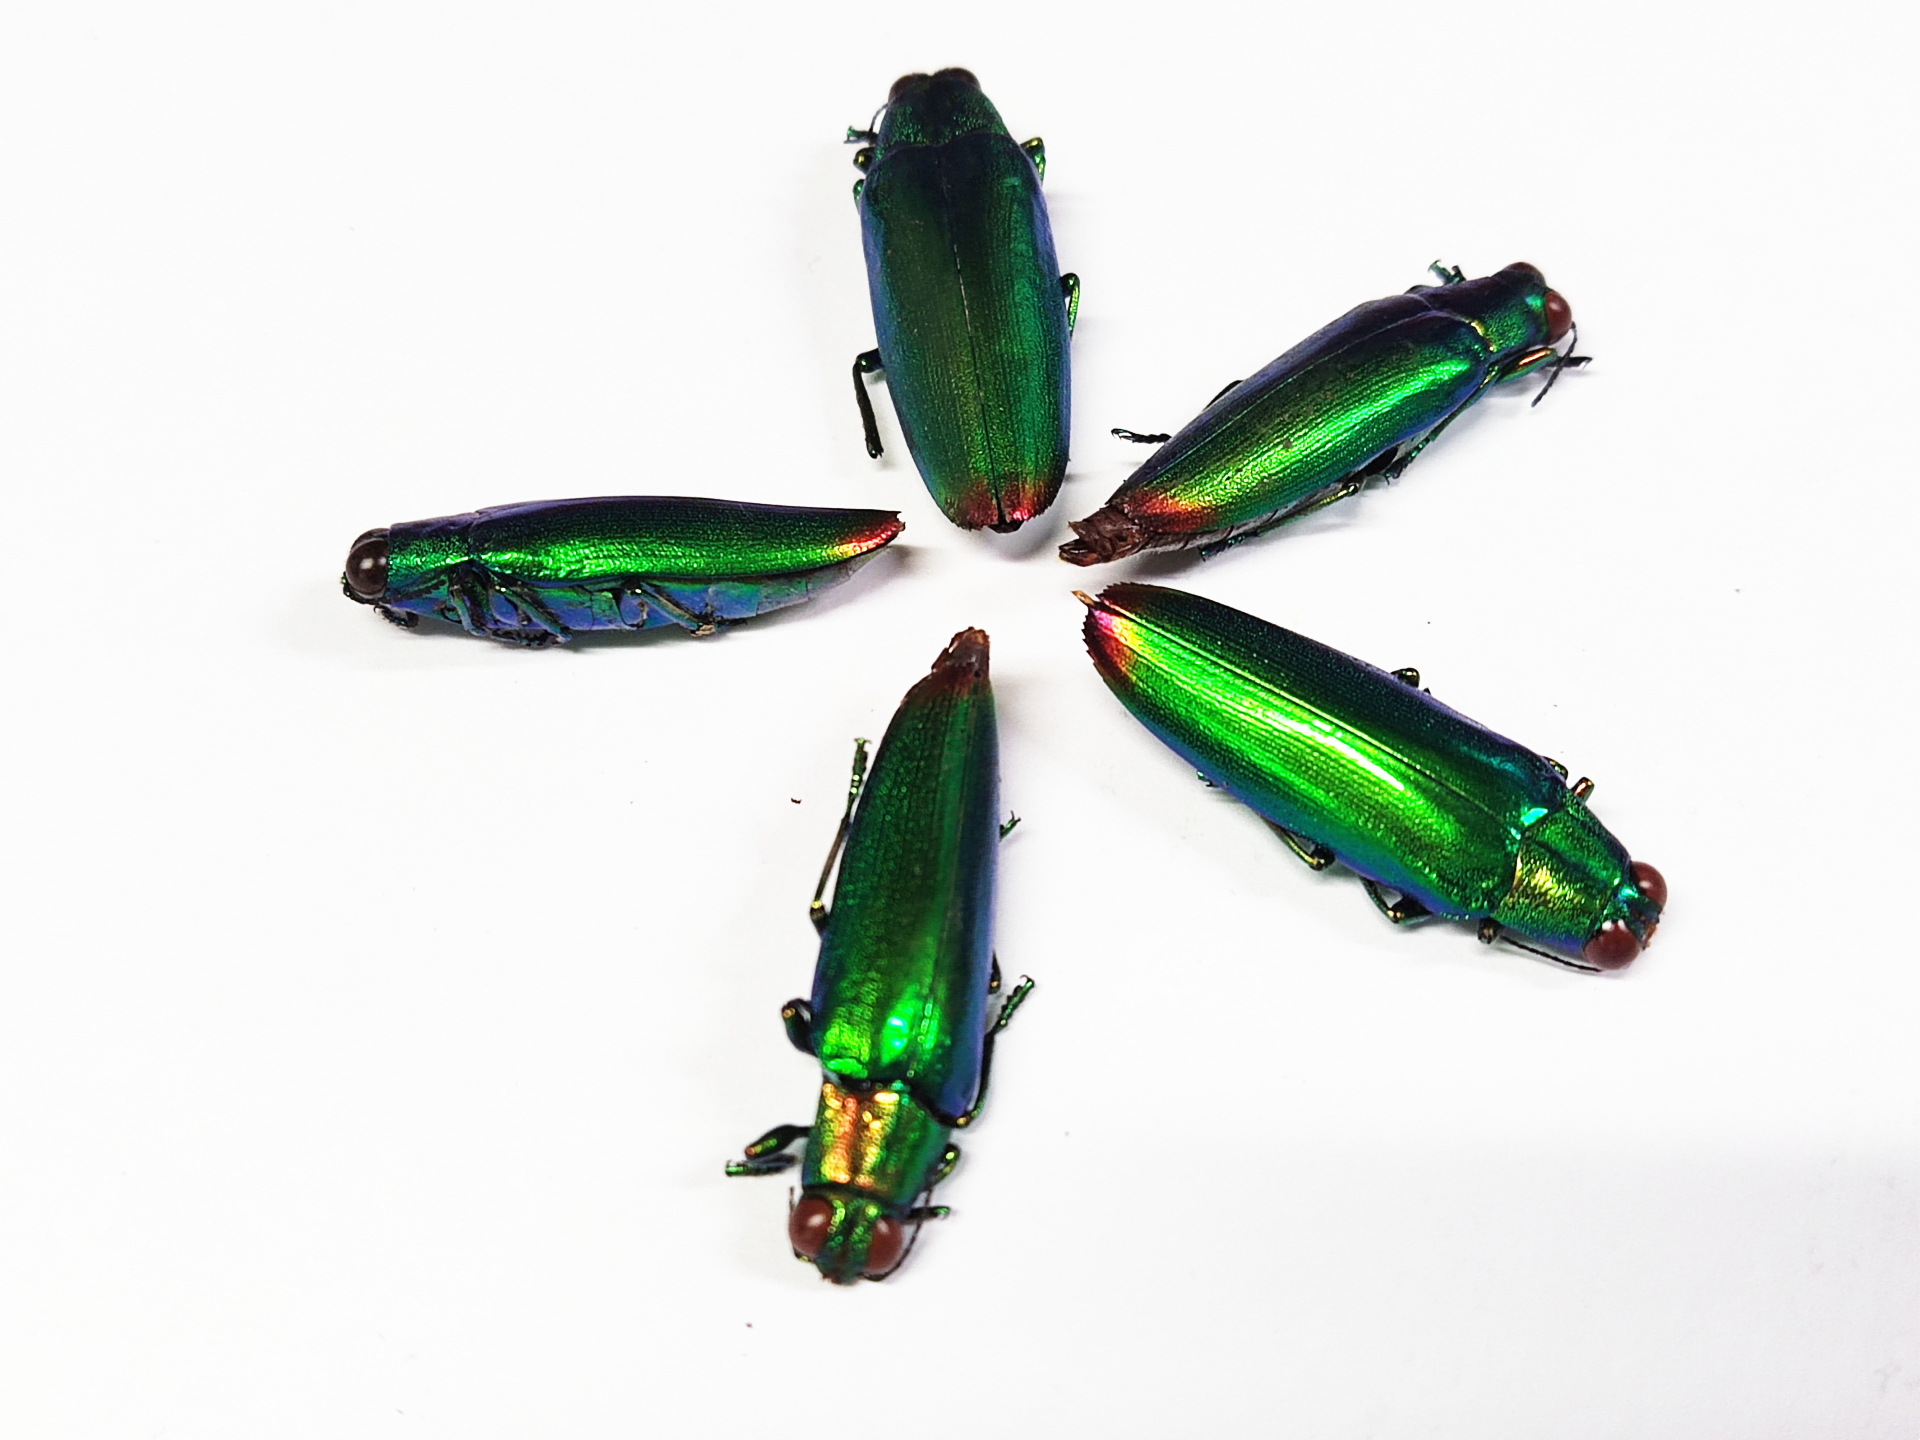 Decorative collection of 5 Beetles